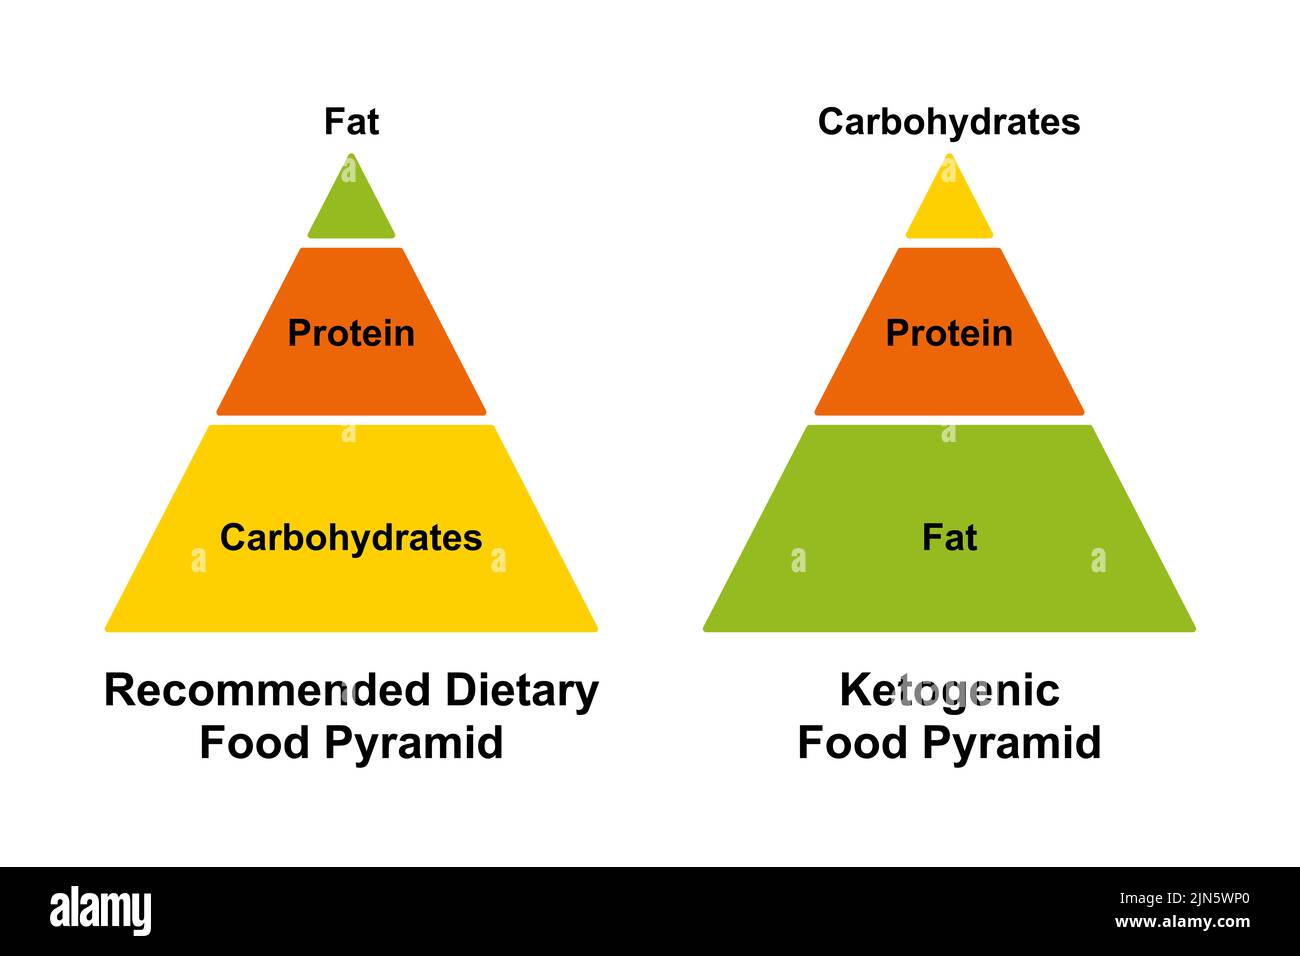 Recommended dietary food pyramid and ketogenic food pyramid. Simplified chart of the different distribution of carbohydrates, protein and fat. Stock Photo